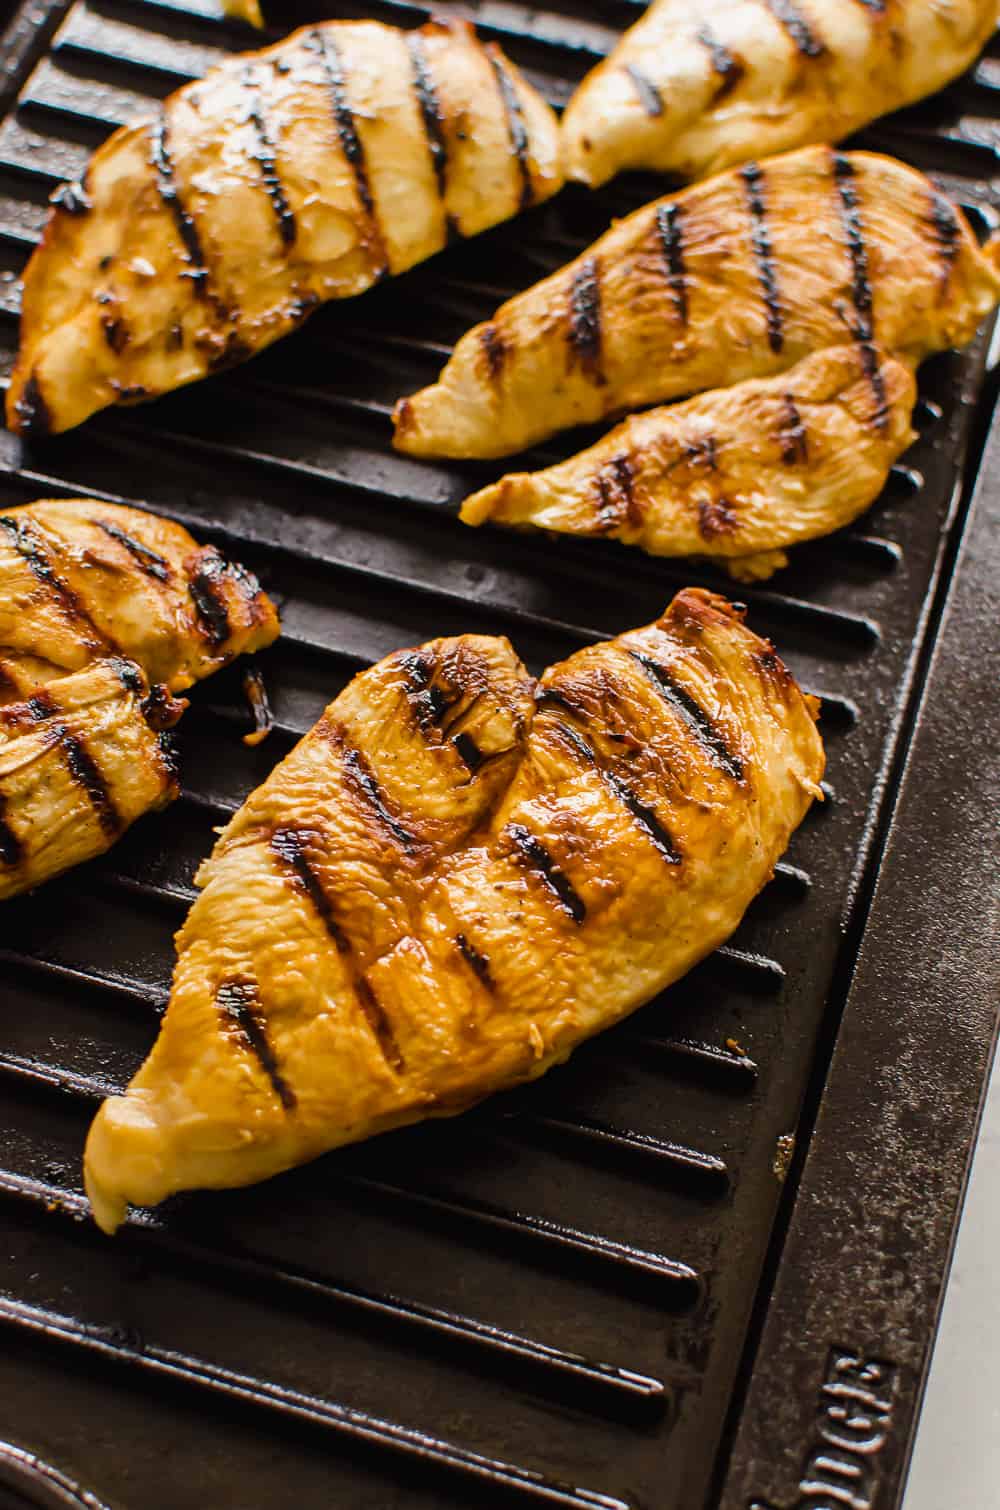 Grilled chicken breasts on a grill pan.